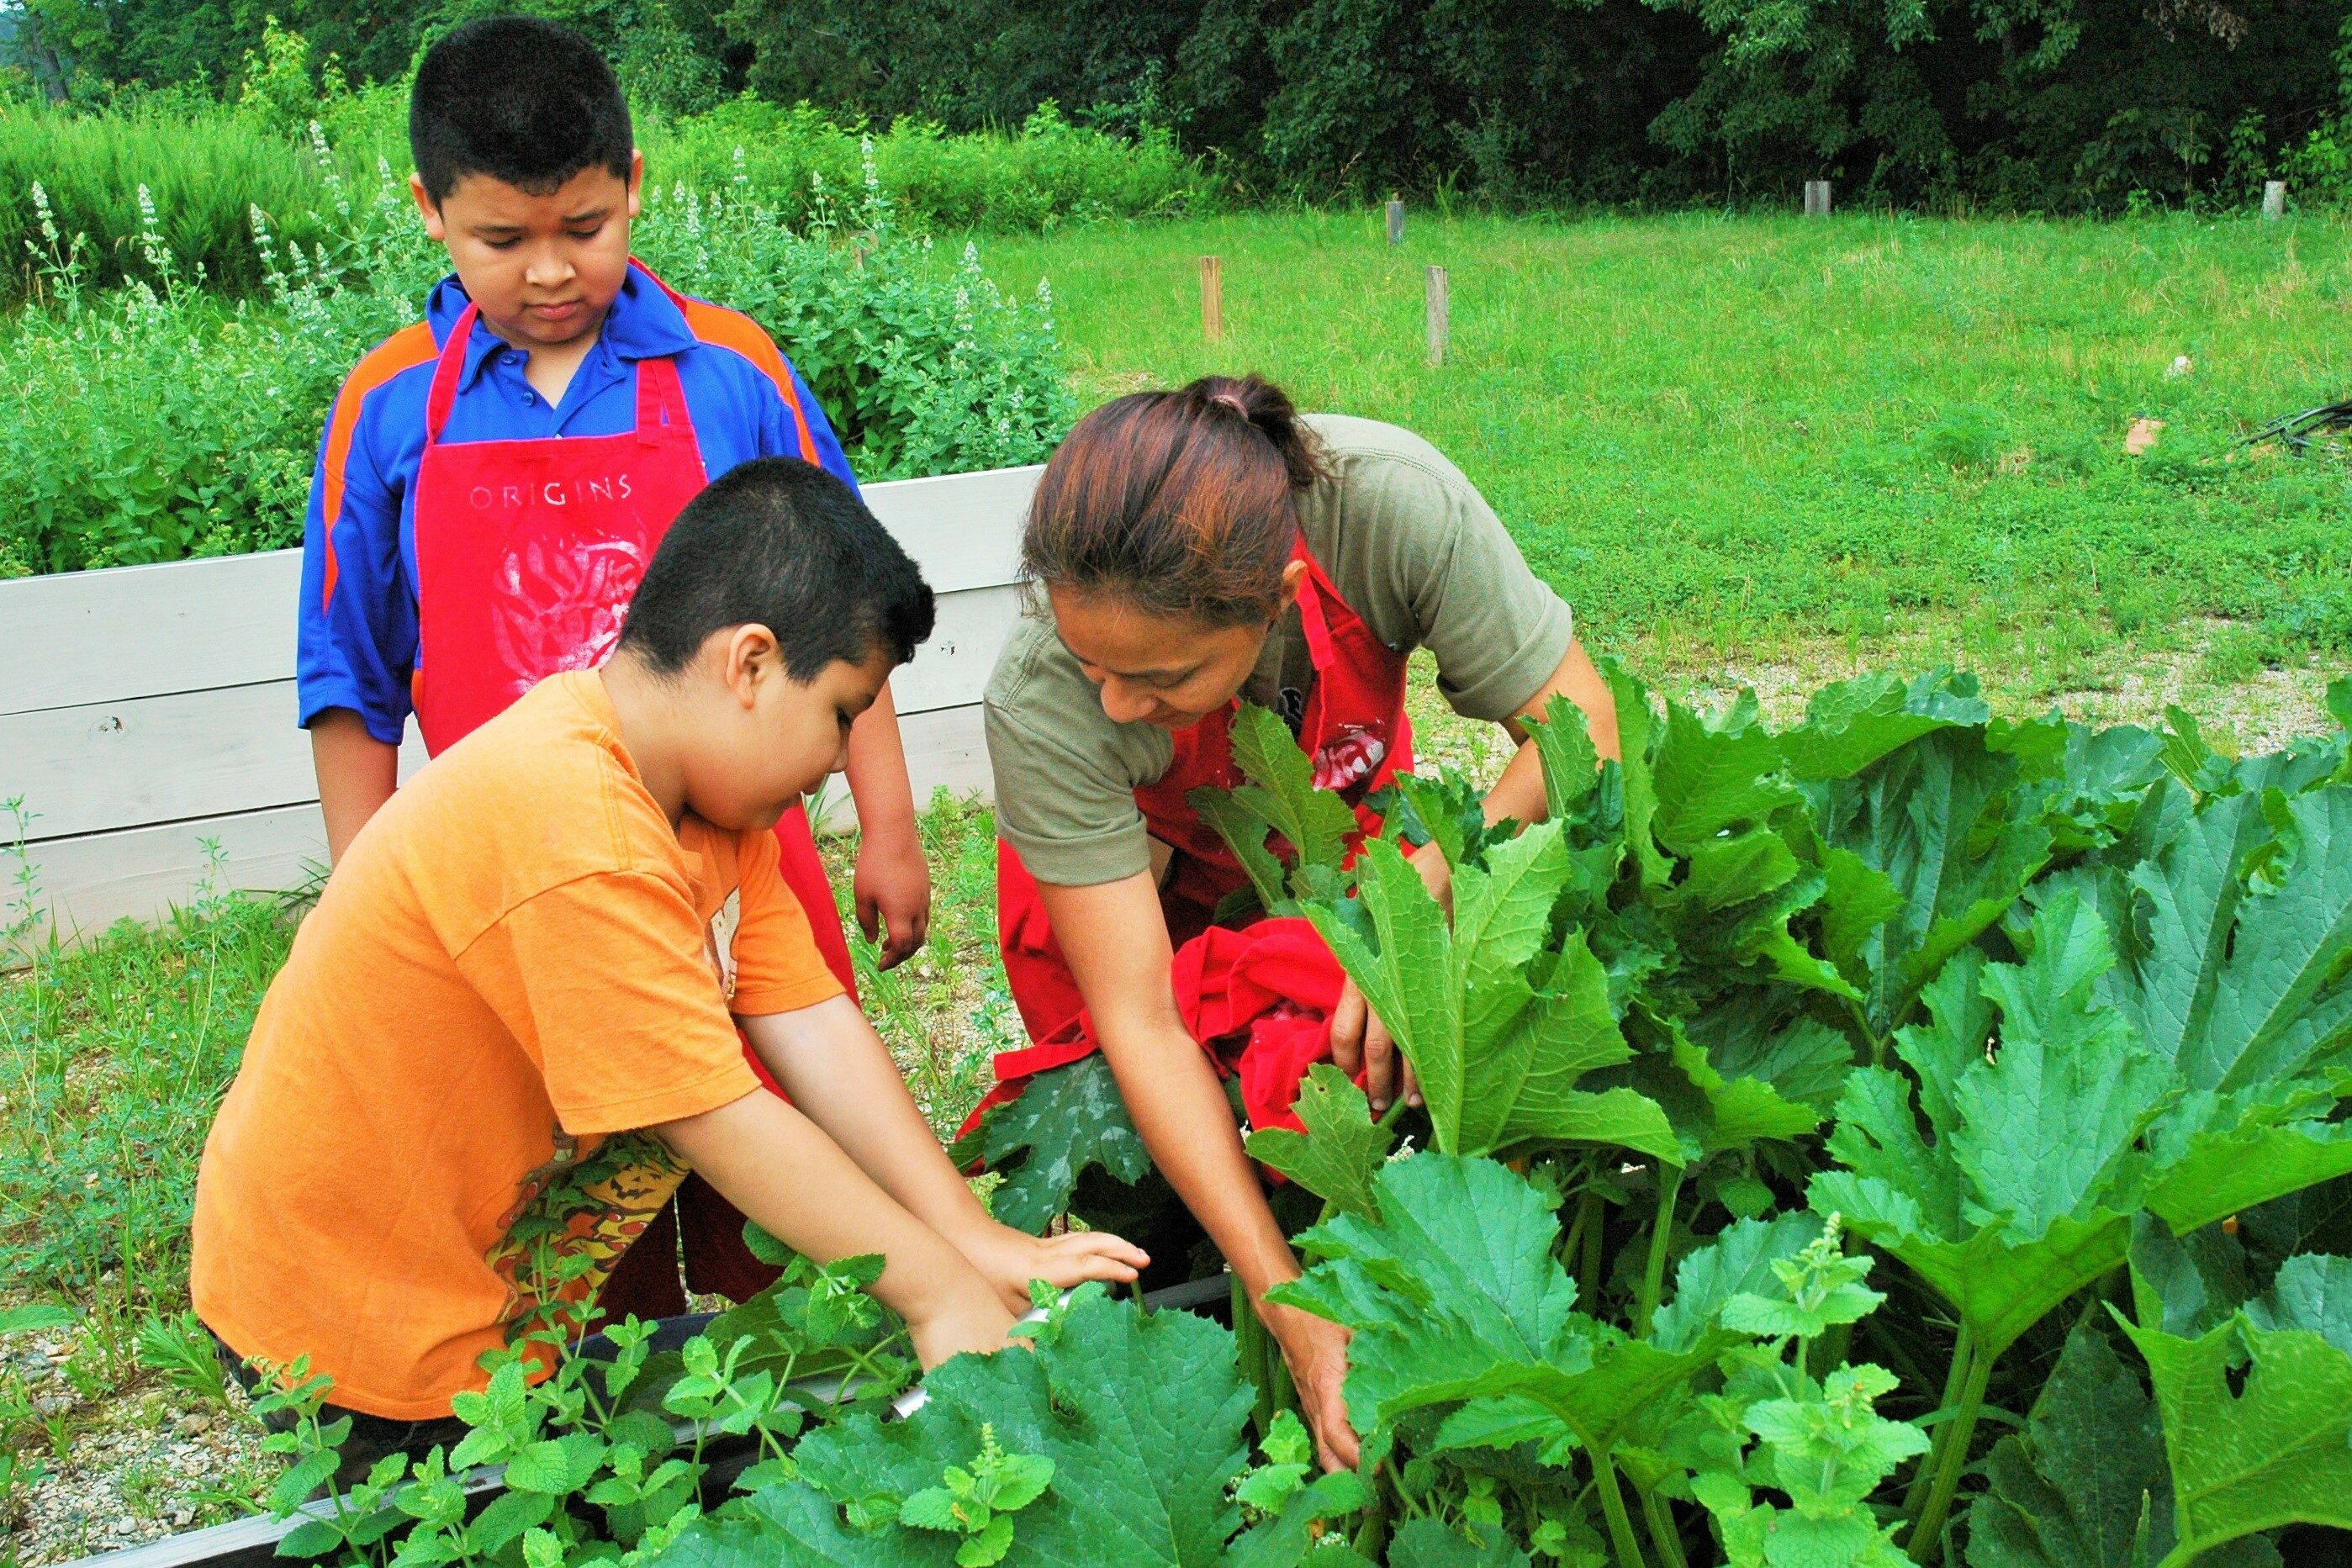 A woman helps two children work in a garden.